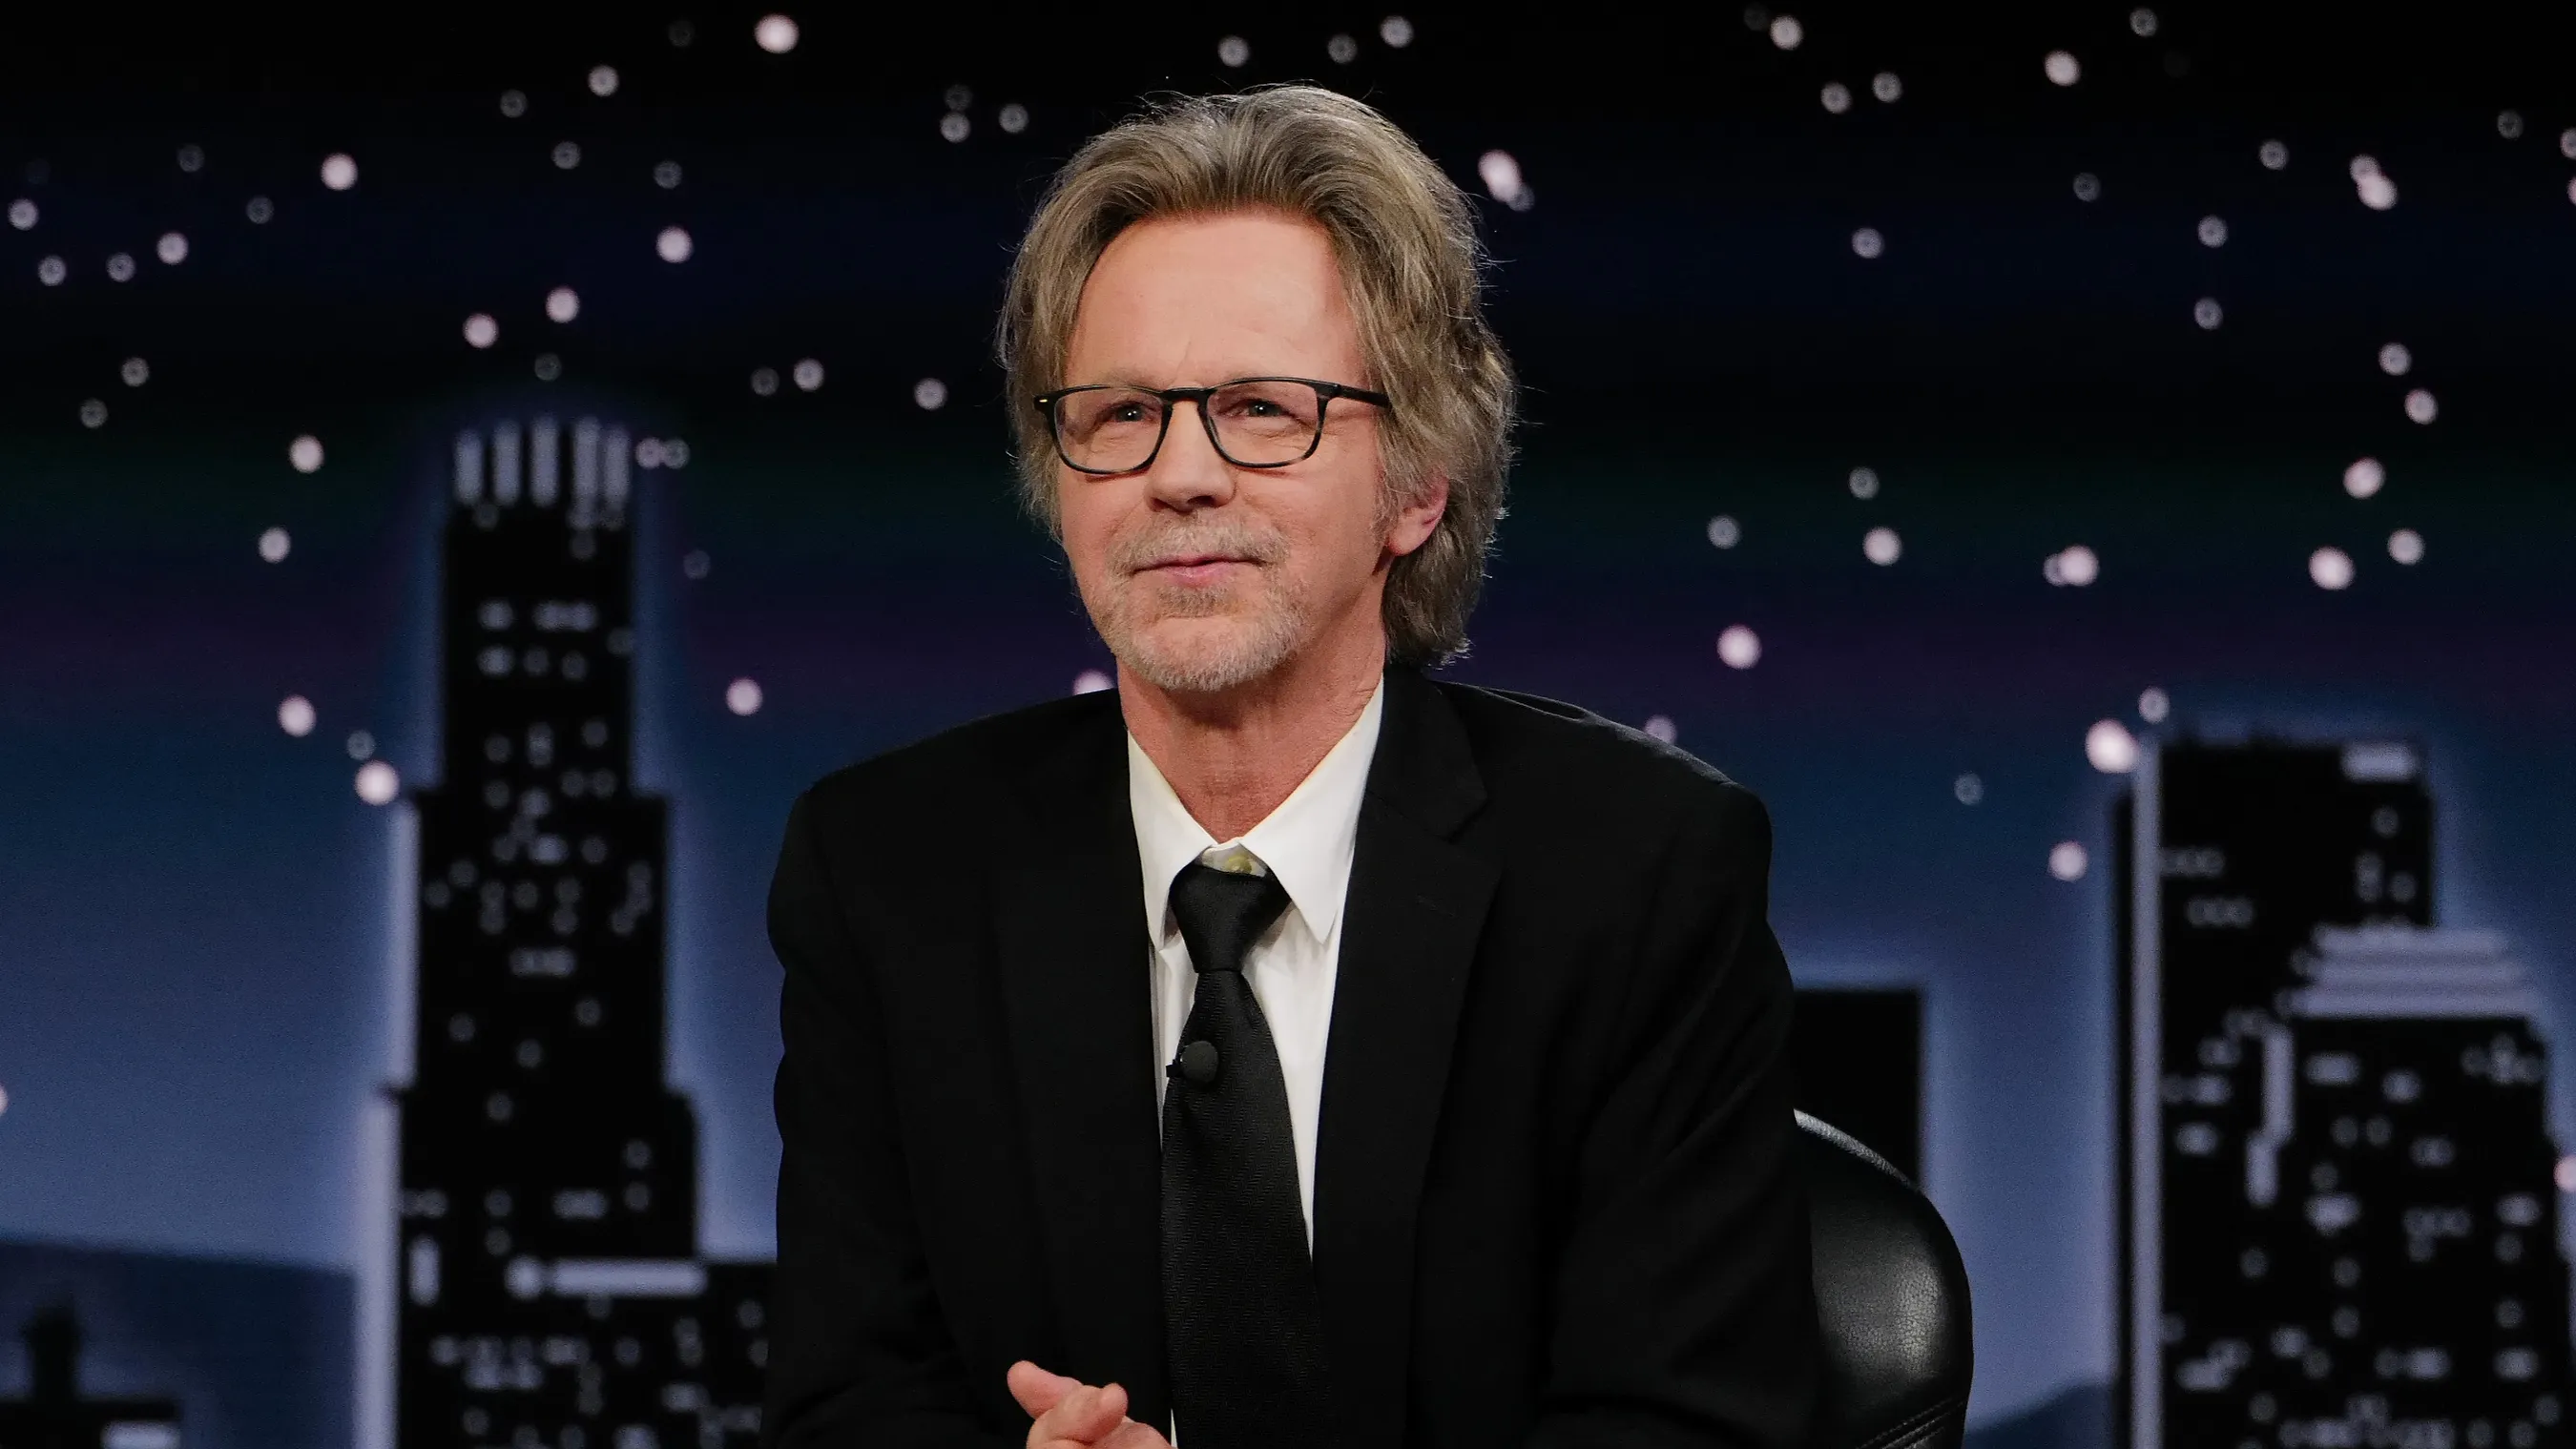 Dana Carvey Expresses Gratitude To Supporters Following Tragic Loss Of Son